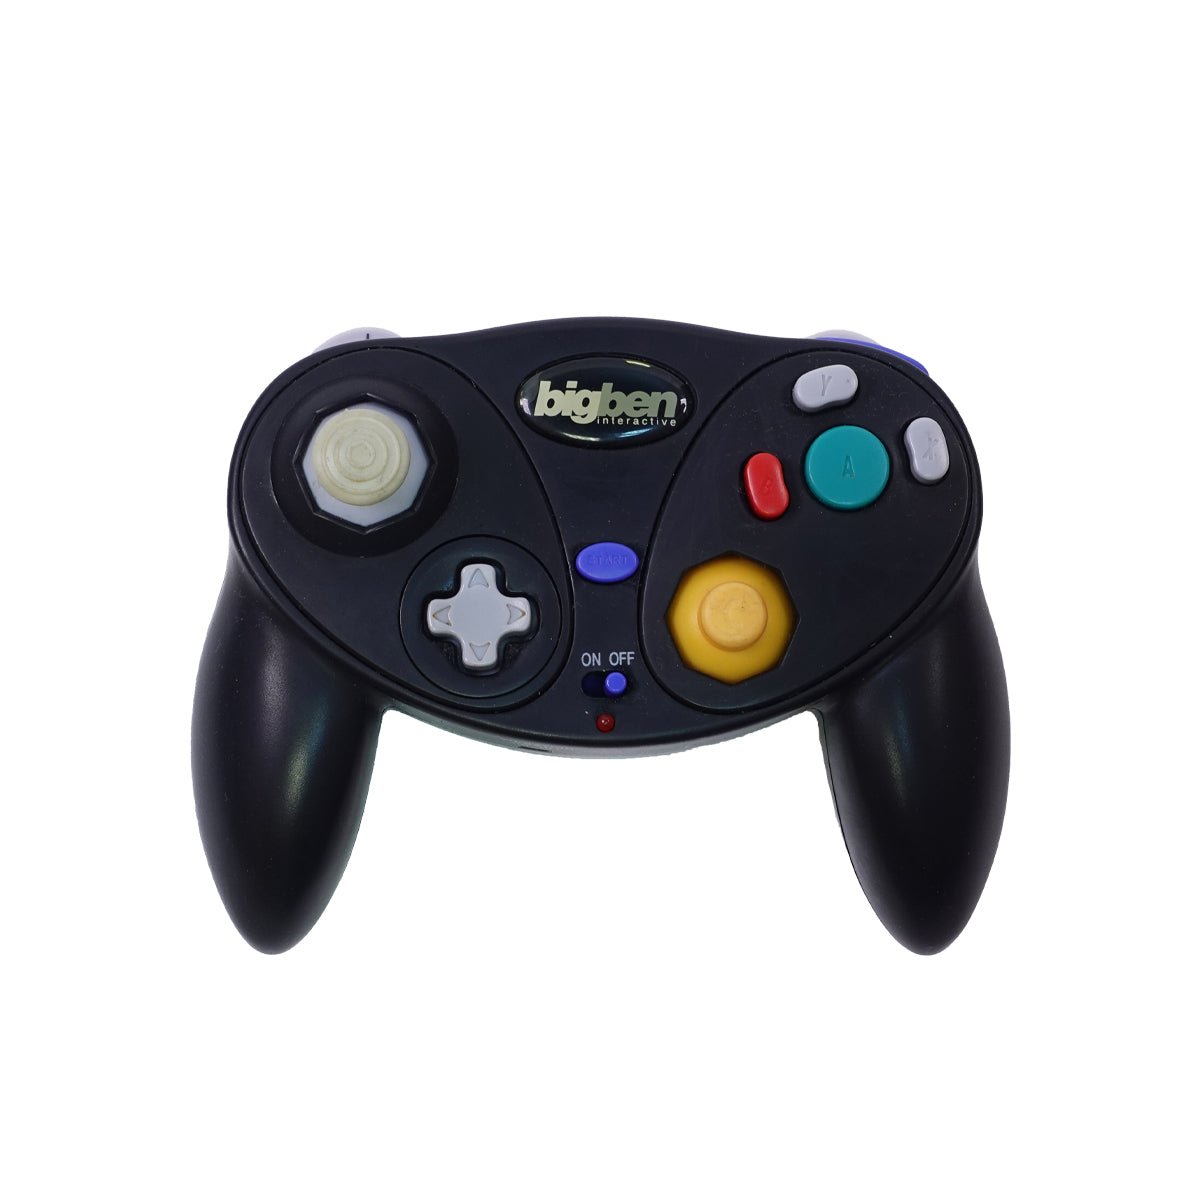 (Pre-Owned) Nintendo GameCube Wireless Controller with Box - Black - Store 974 | ستور ٩٧٤